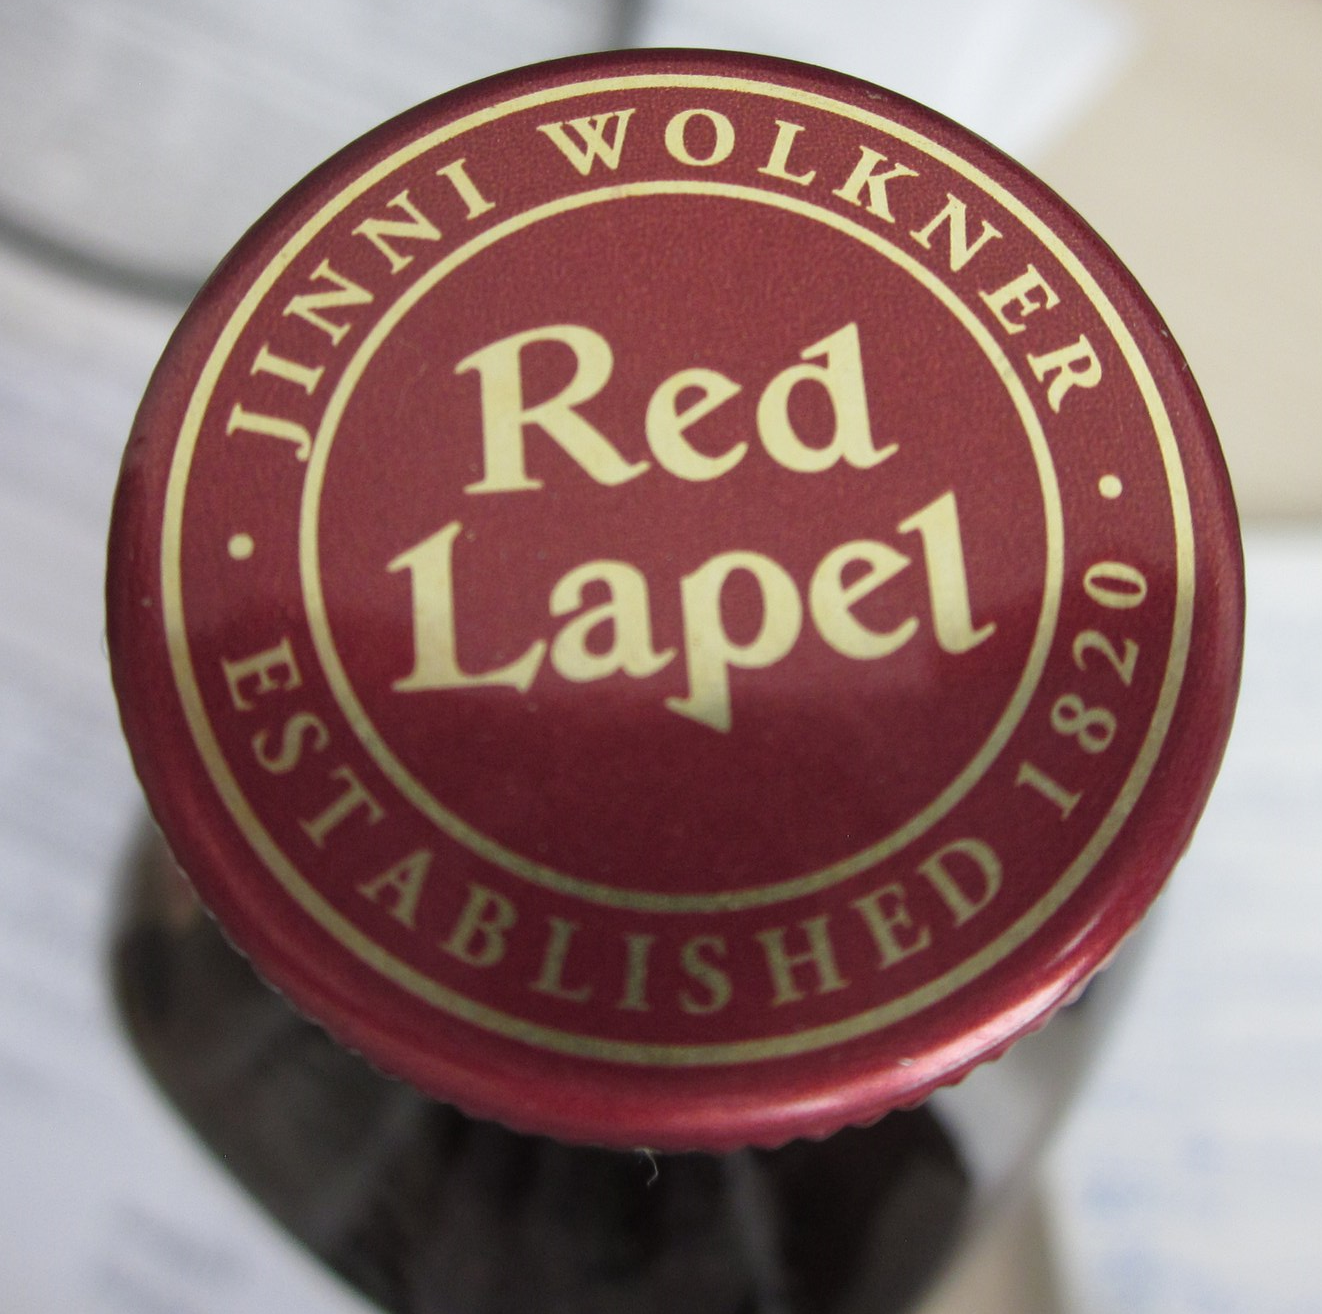 Red Lapel - My, Whiskey, Alcohol, Red label, , Palenque, My, Counterfeit